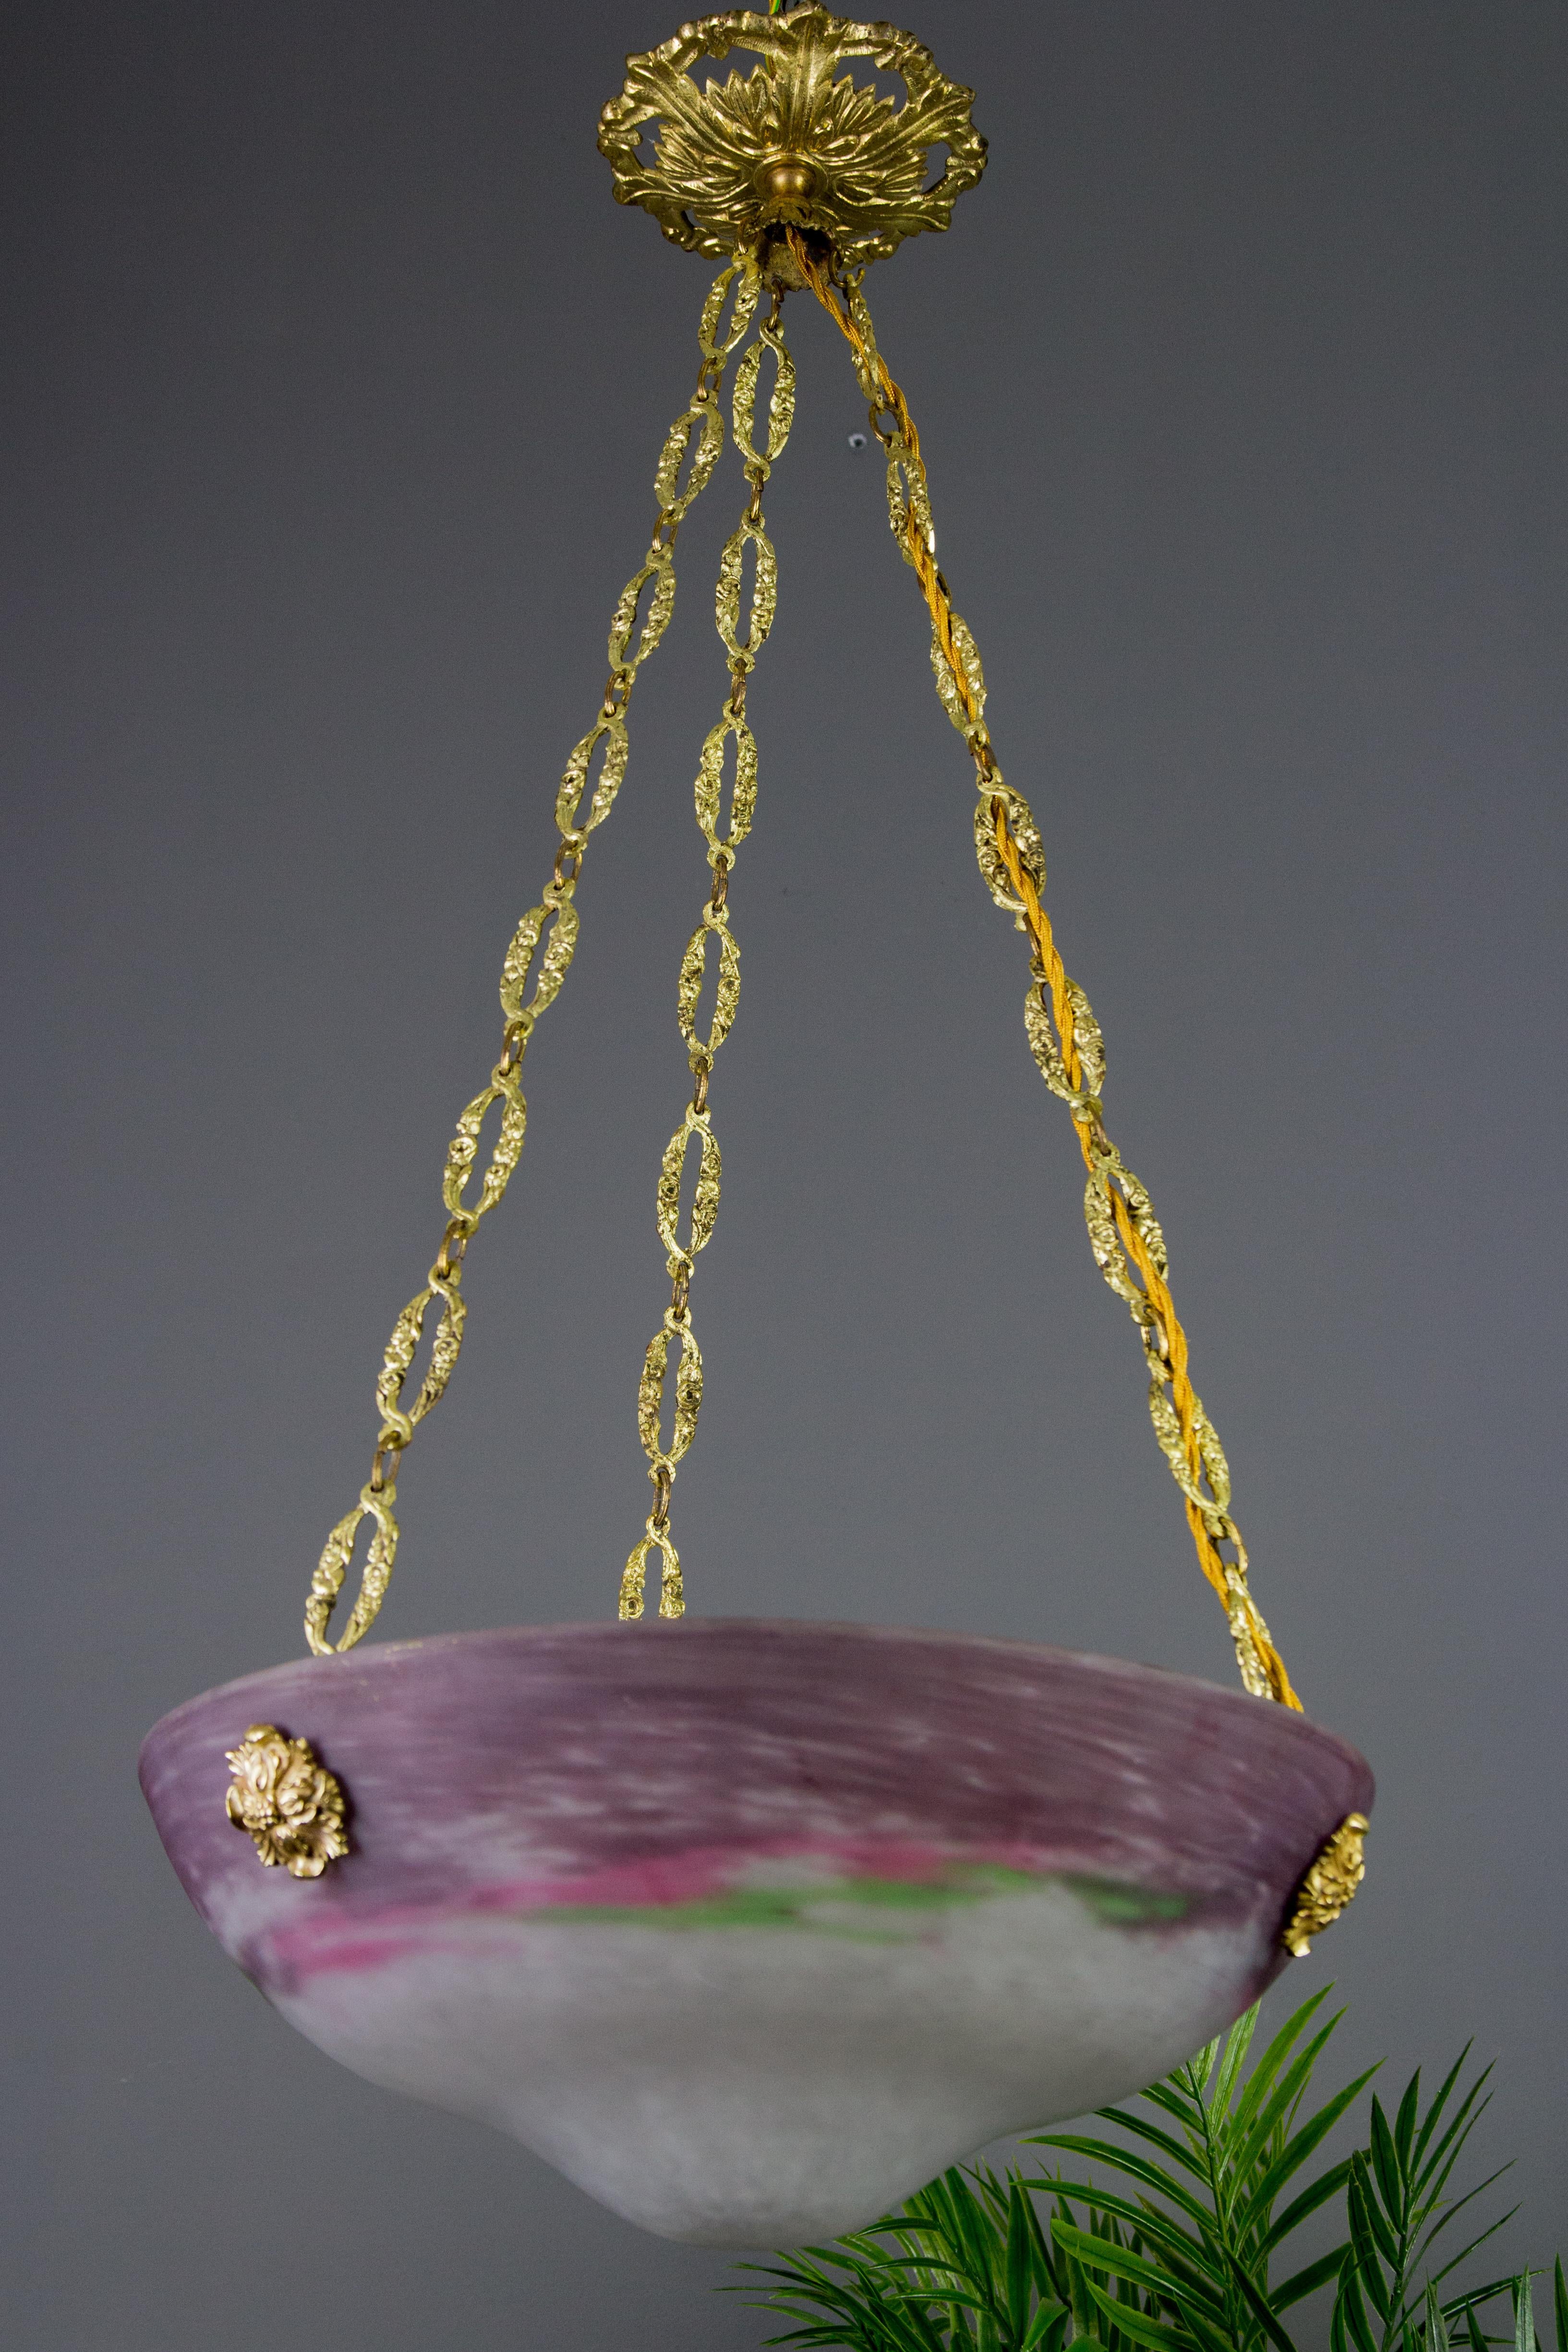 French Art Nouveau Glass Bowl Pendant Chandelier Signed by Muller Frères, 1920s For Sale 3